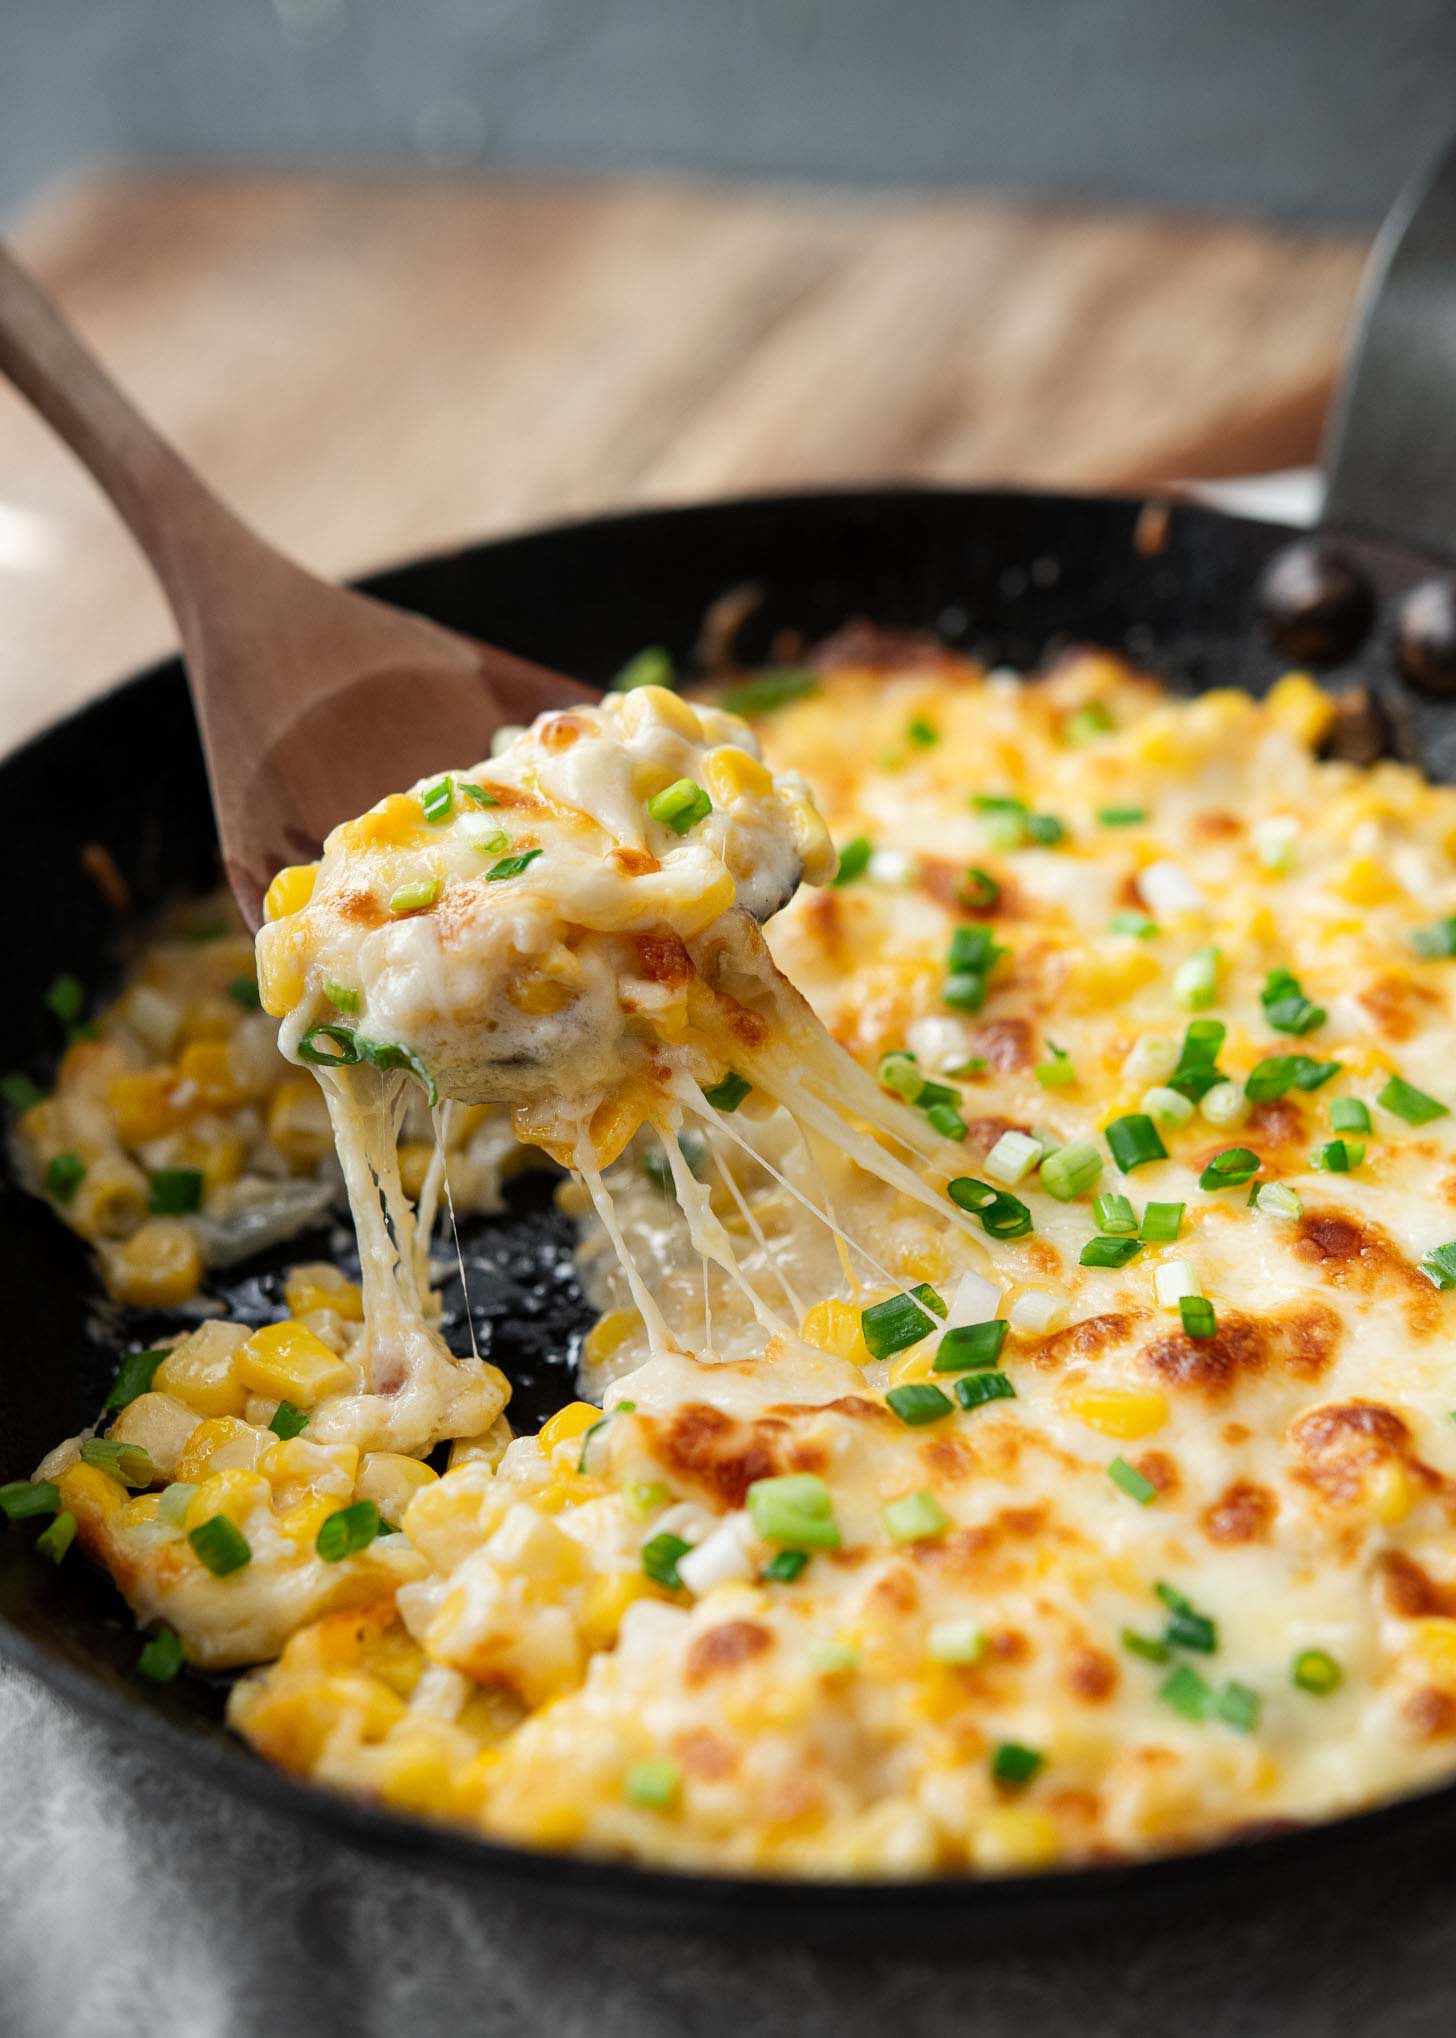 Gooey melted cheese from the baked Korean corn cheese.